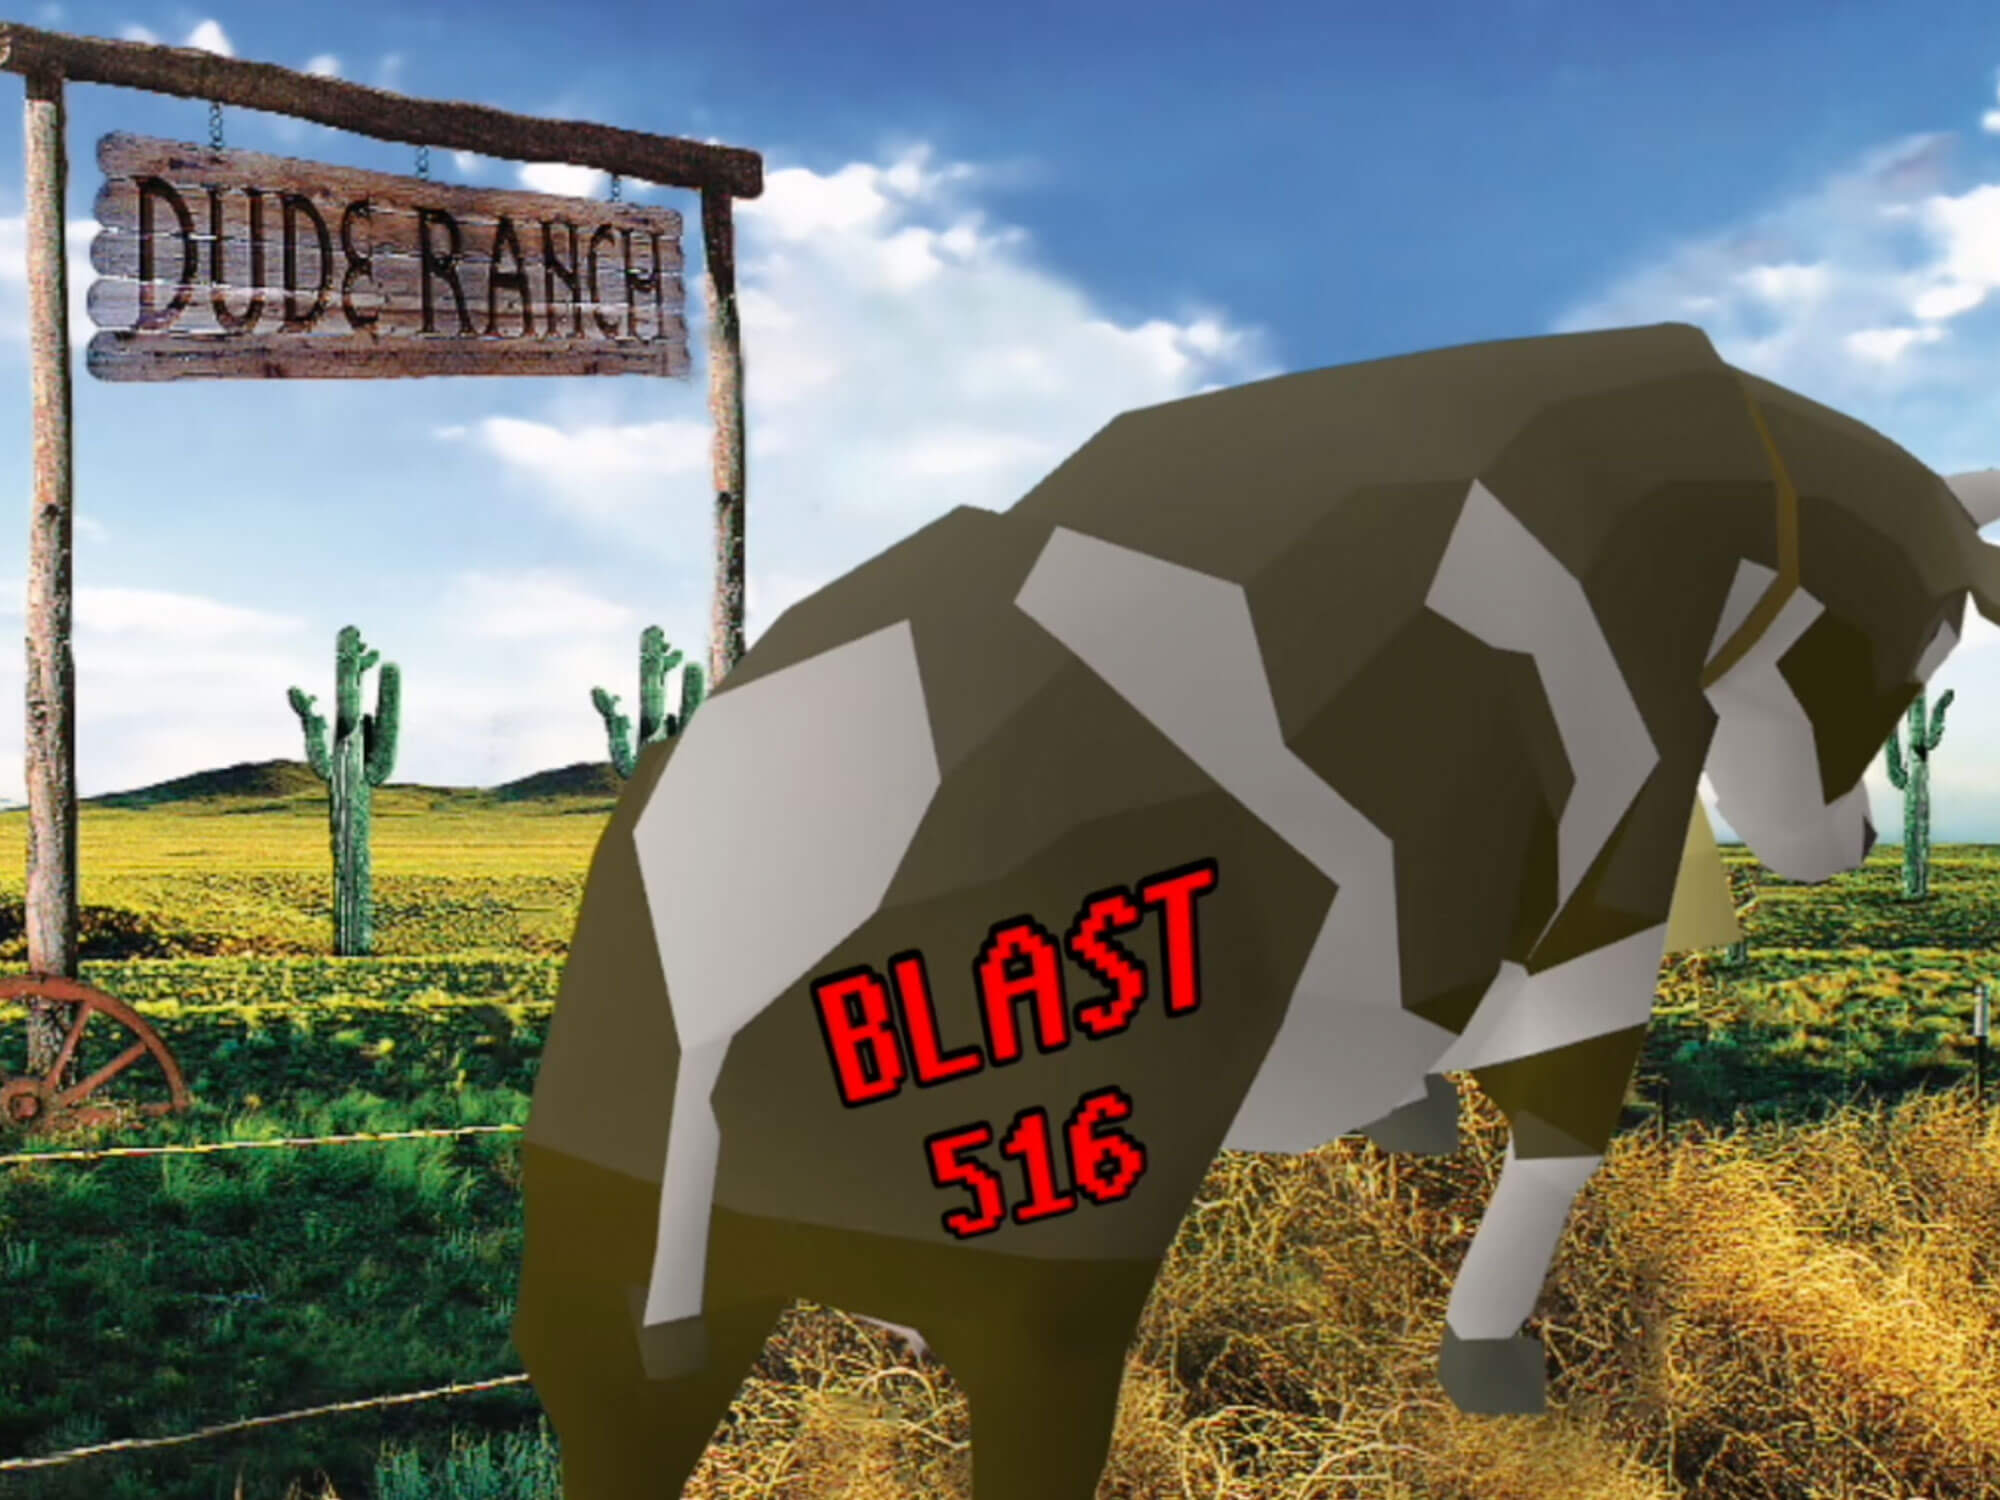 Mock RuneScape-themed version of the Blink-182 Dude Ranch album cover